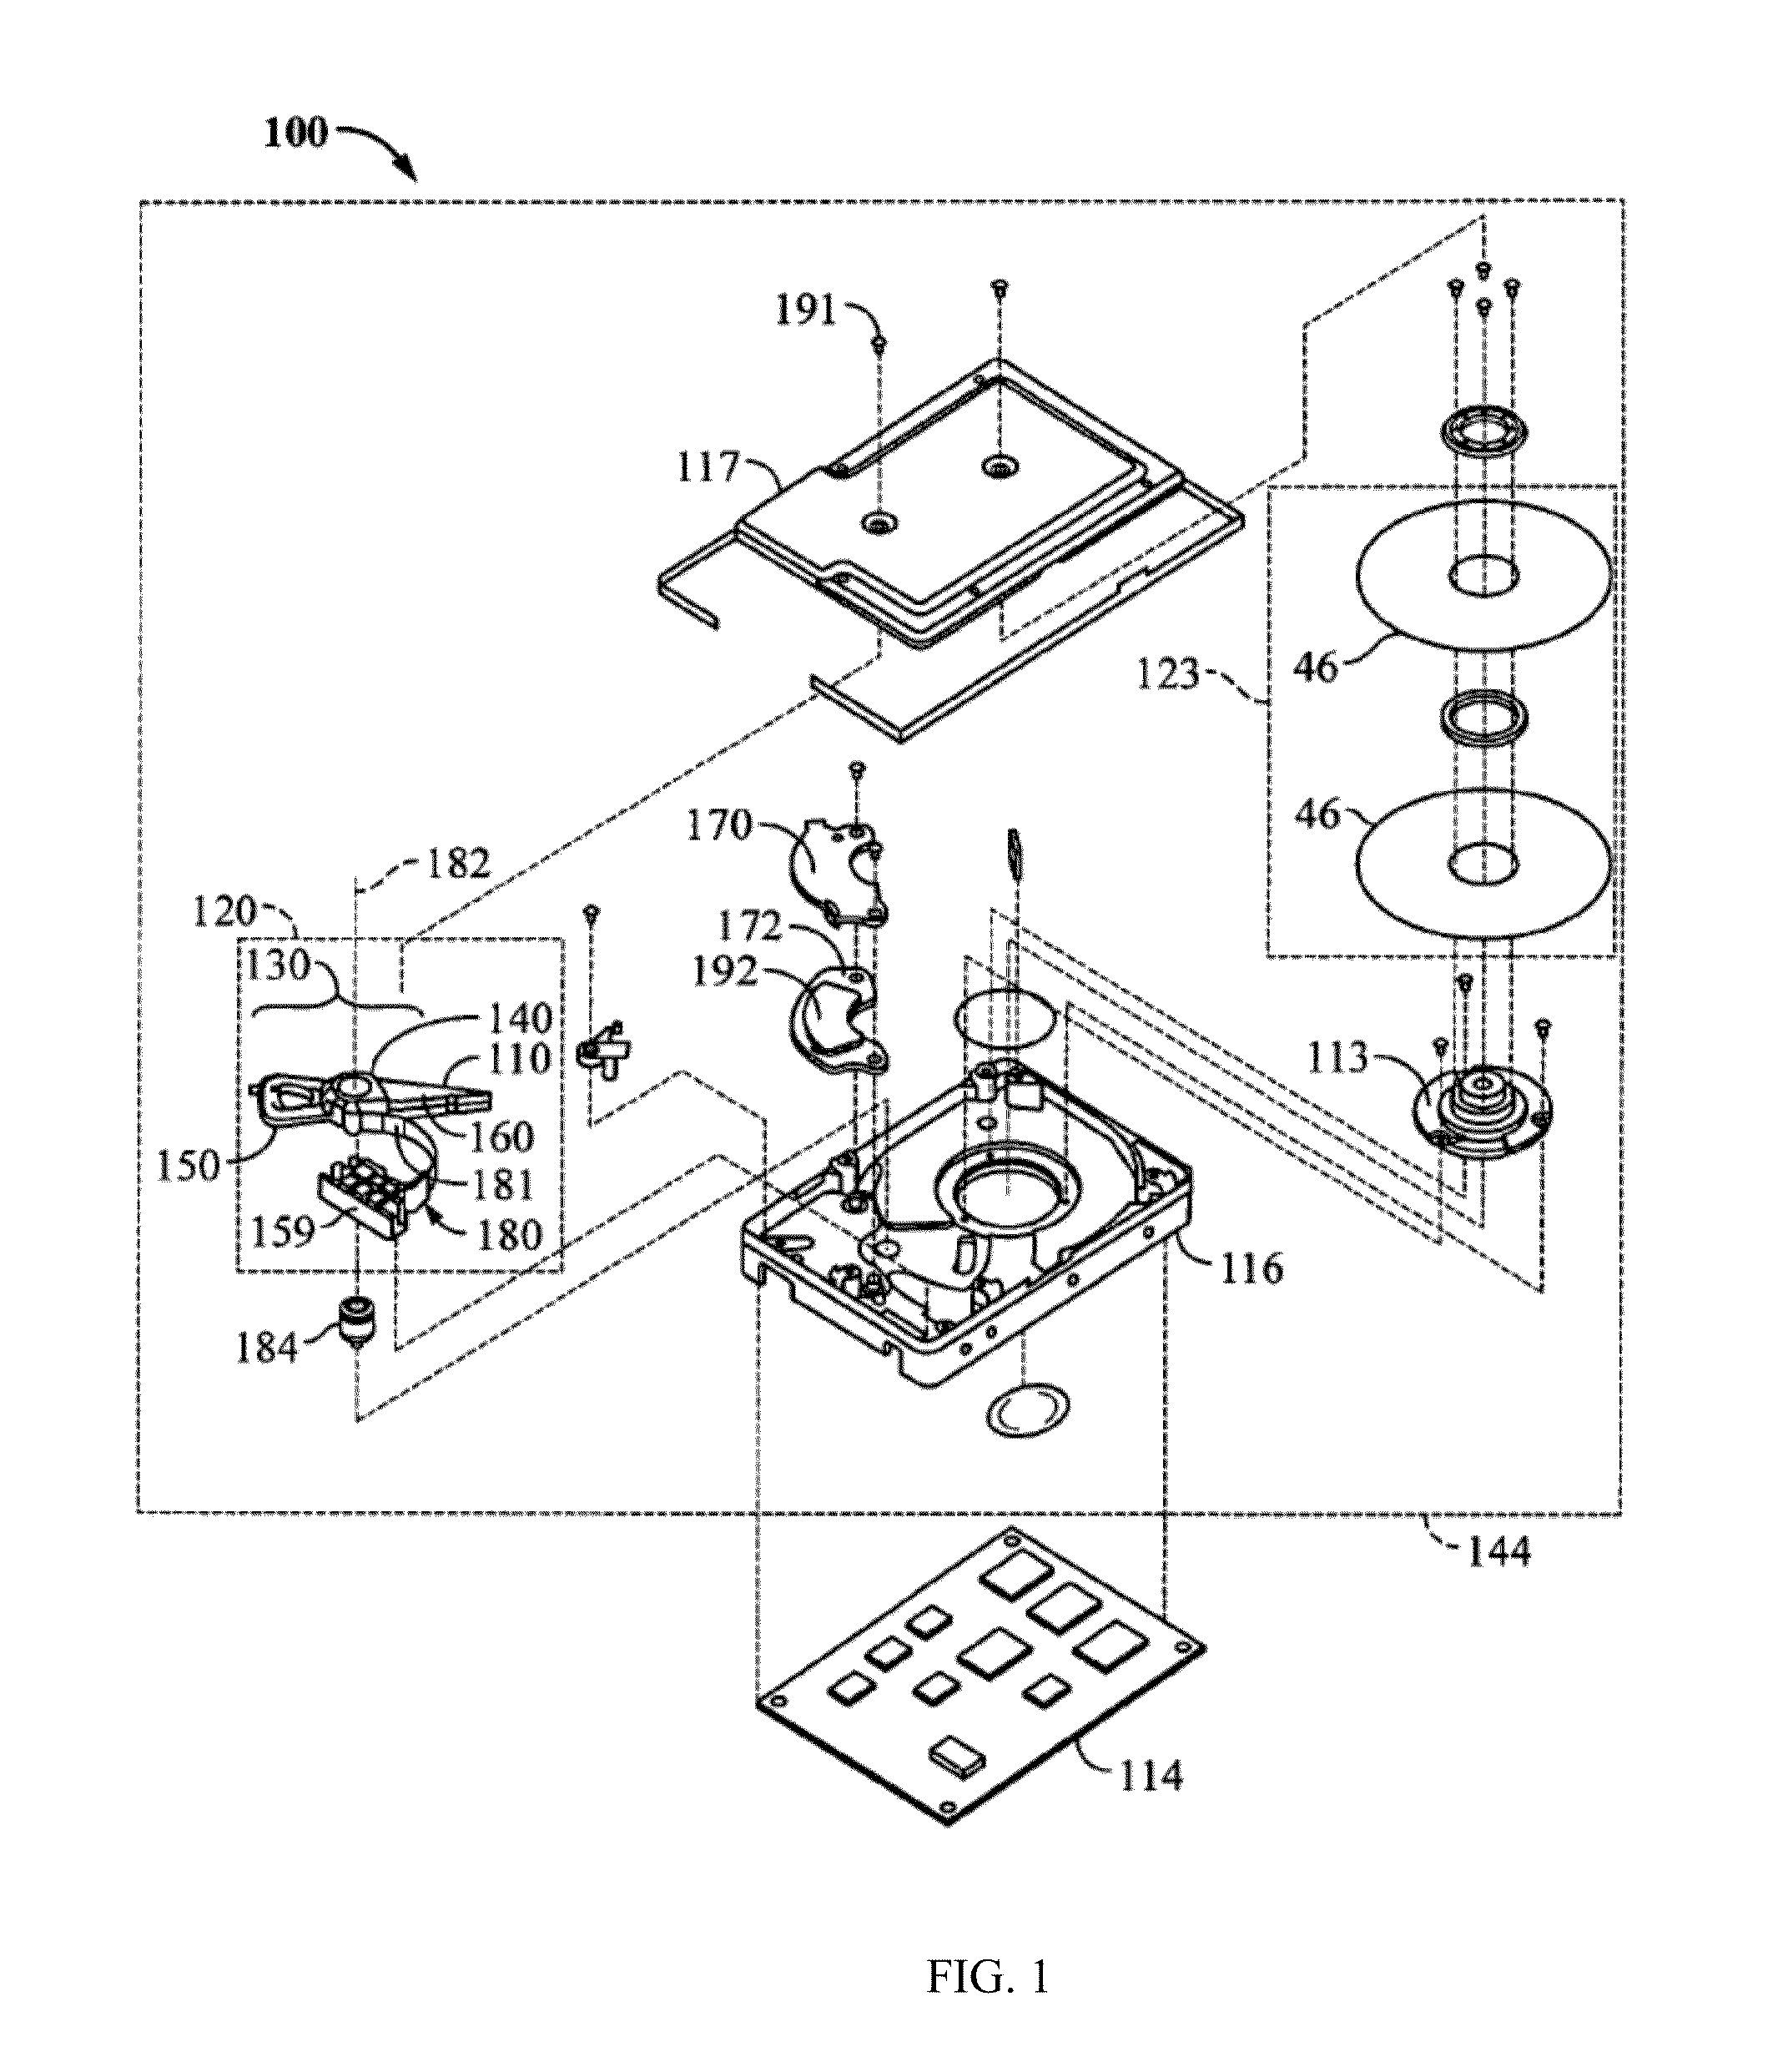 Systems and methods for improving sequential data rate performance using sorted data zones